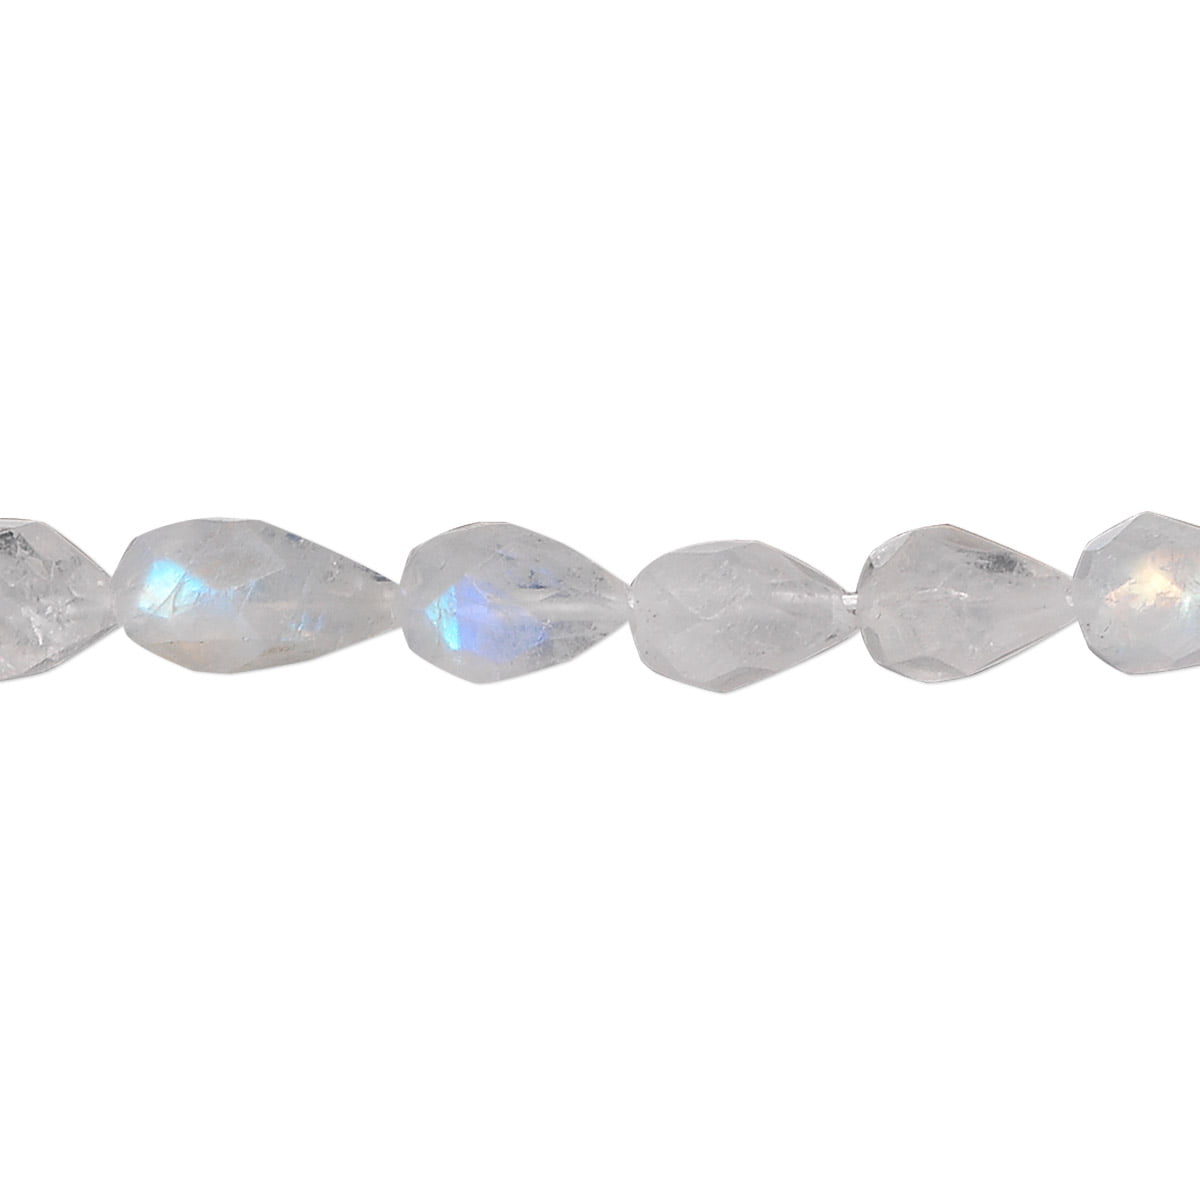 Natural Gemstone Moonstone Jewelry Making Beads 15" White Beauty Beads in Lots 